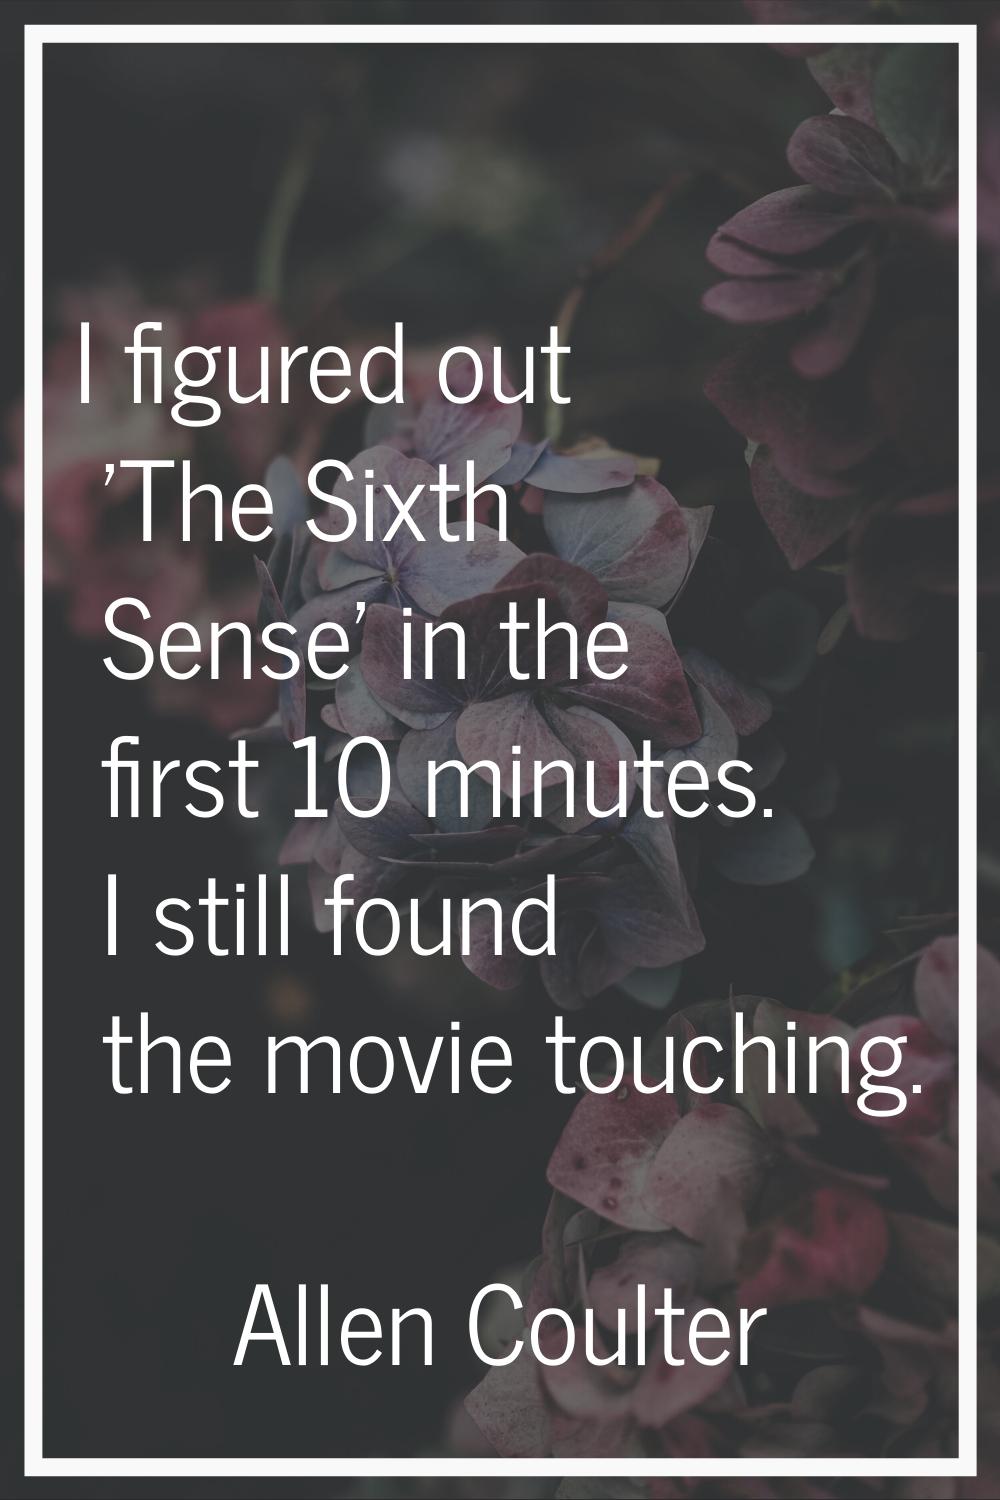 I figured out 'The Sixth Sense' in the first 10 minutes. I still found the movie touching.